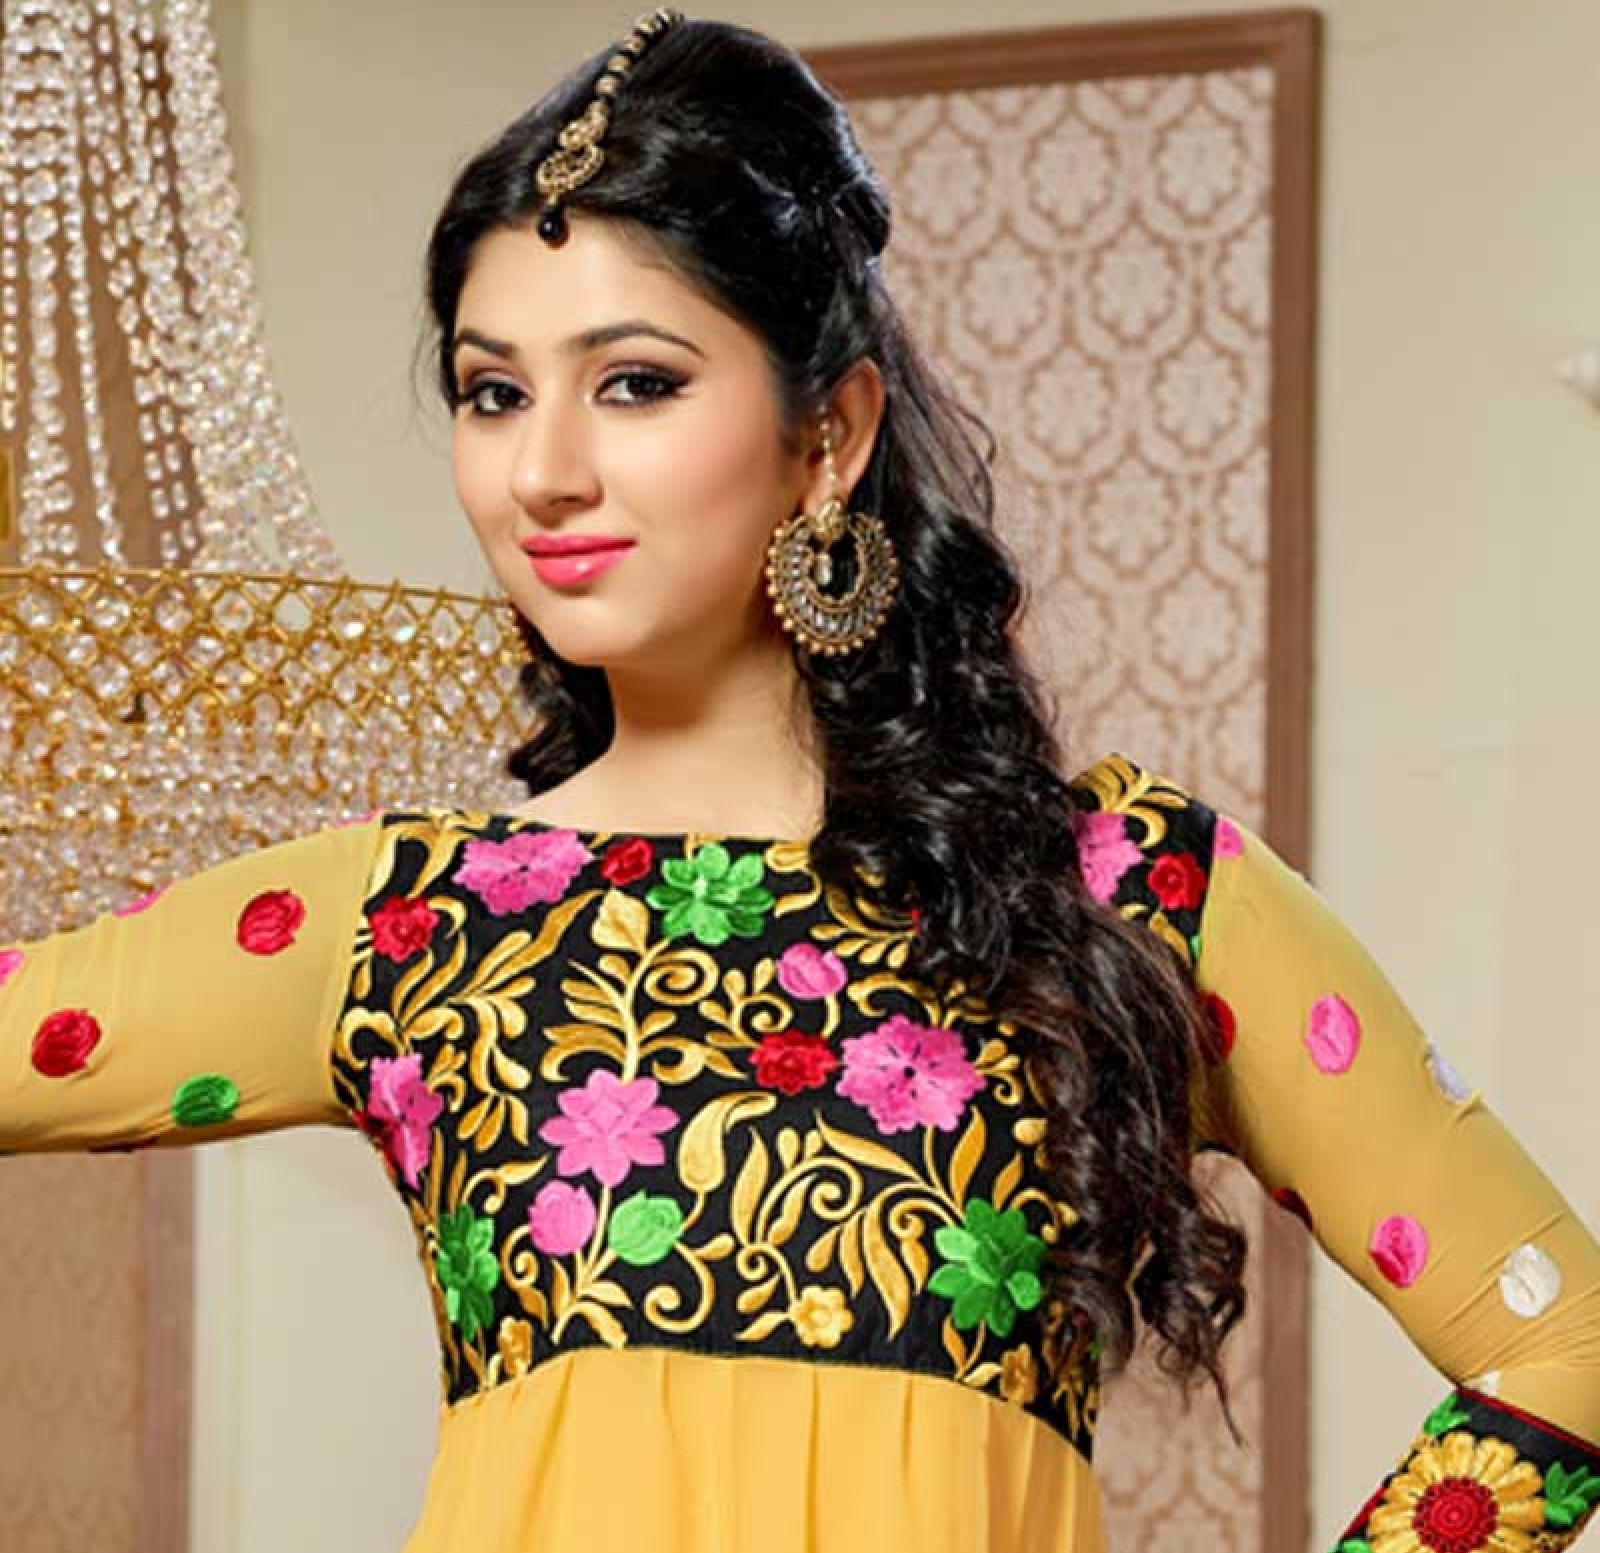 Free Download HD Wallpapers: Disha Parmar Latest Pictures HD Wallpapers